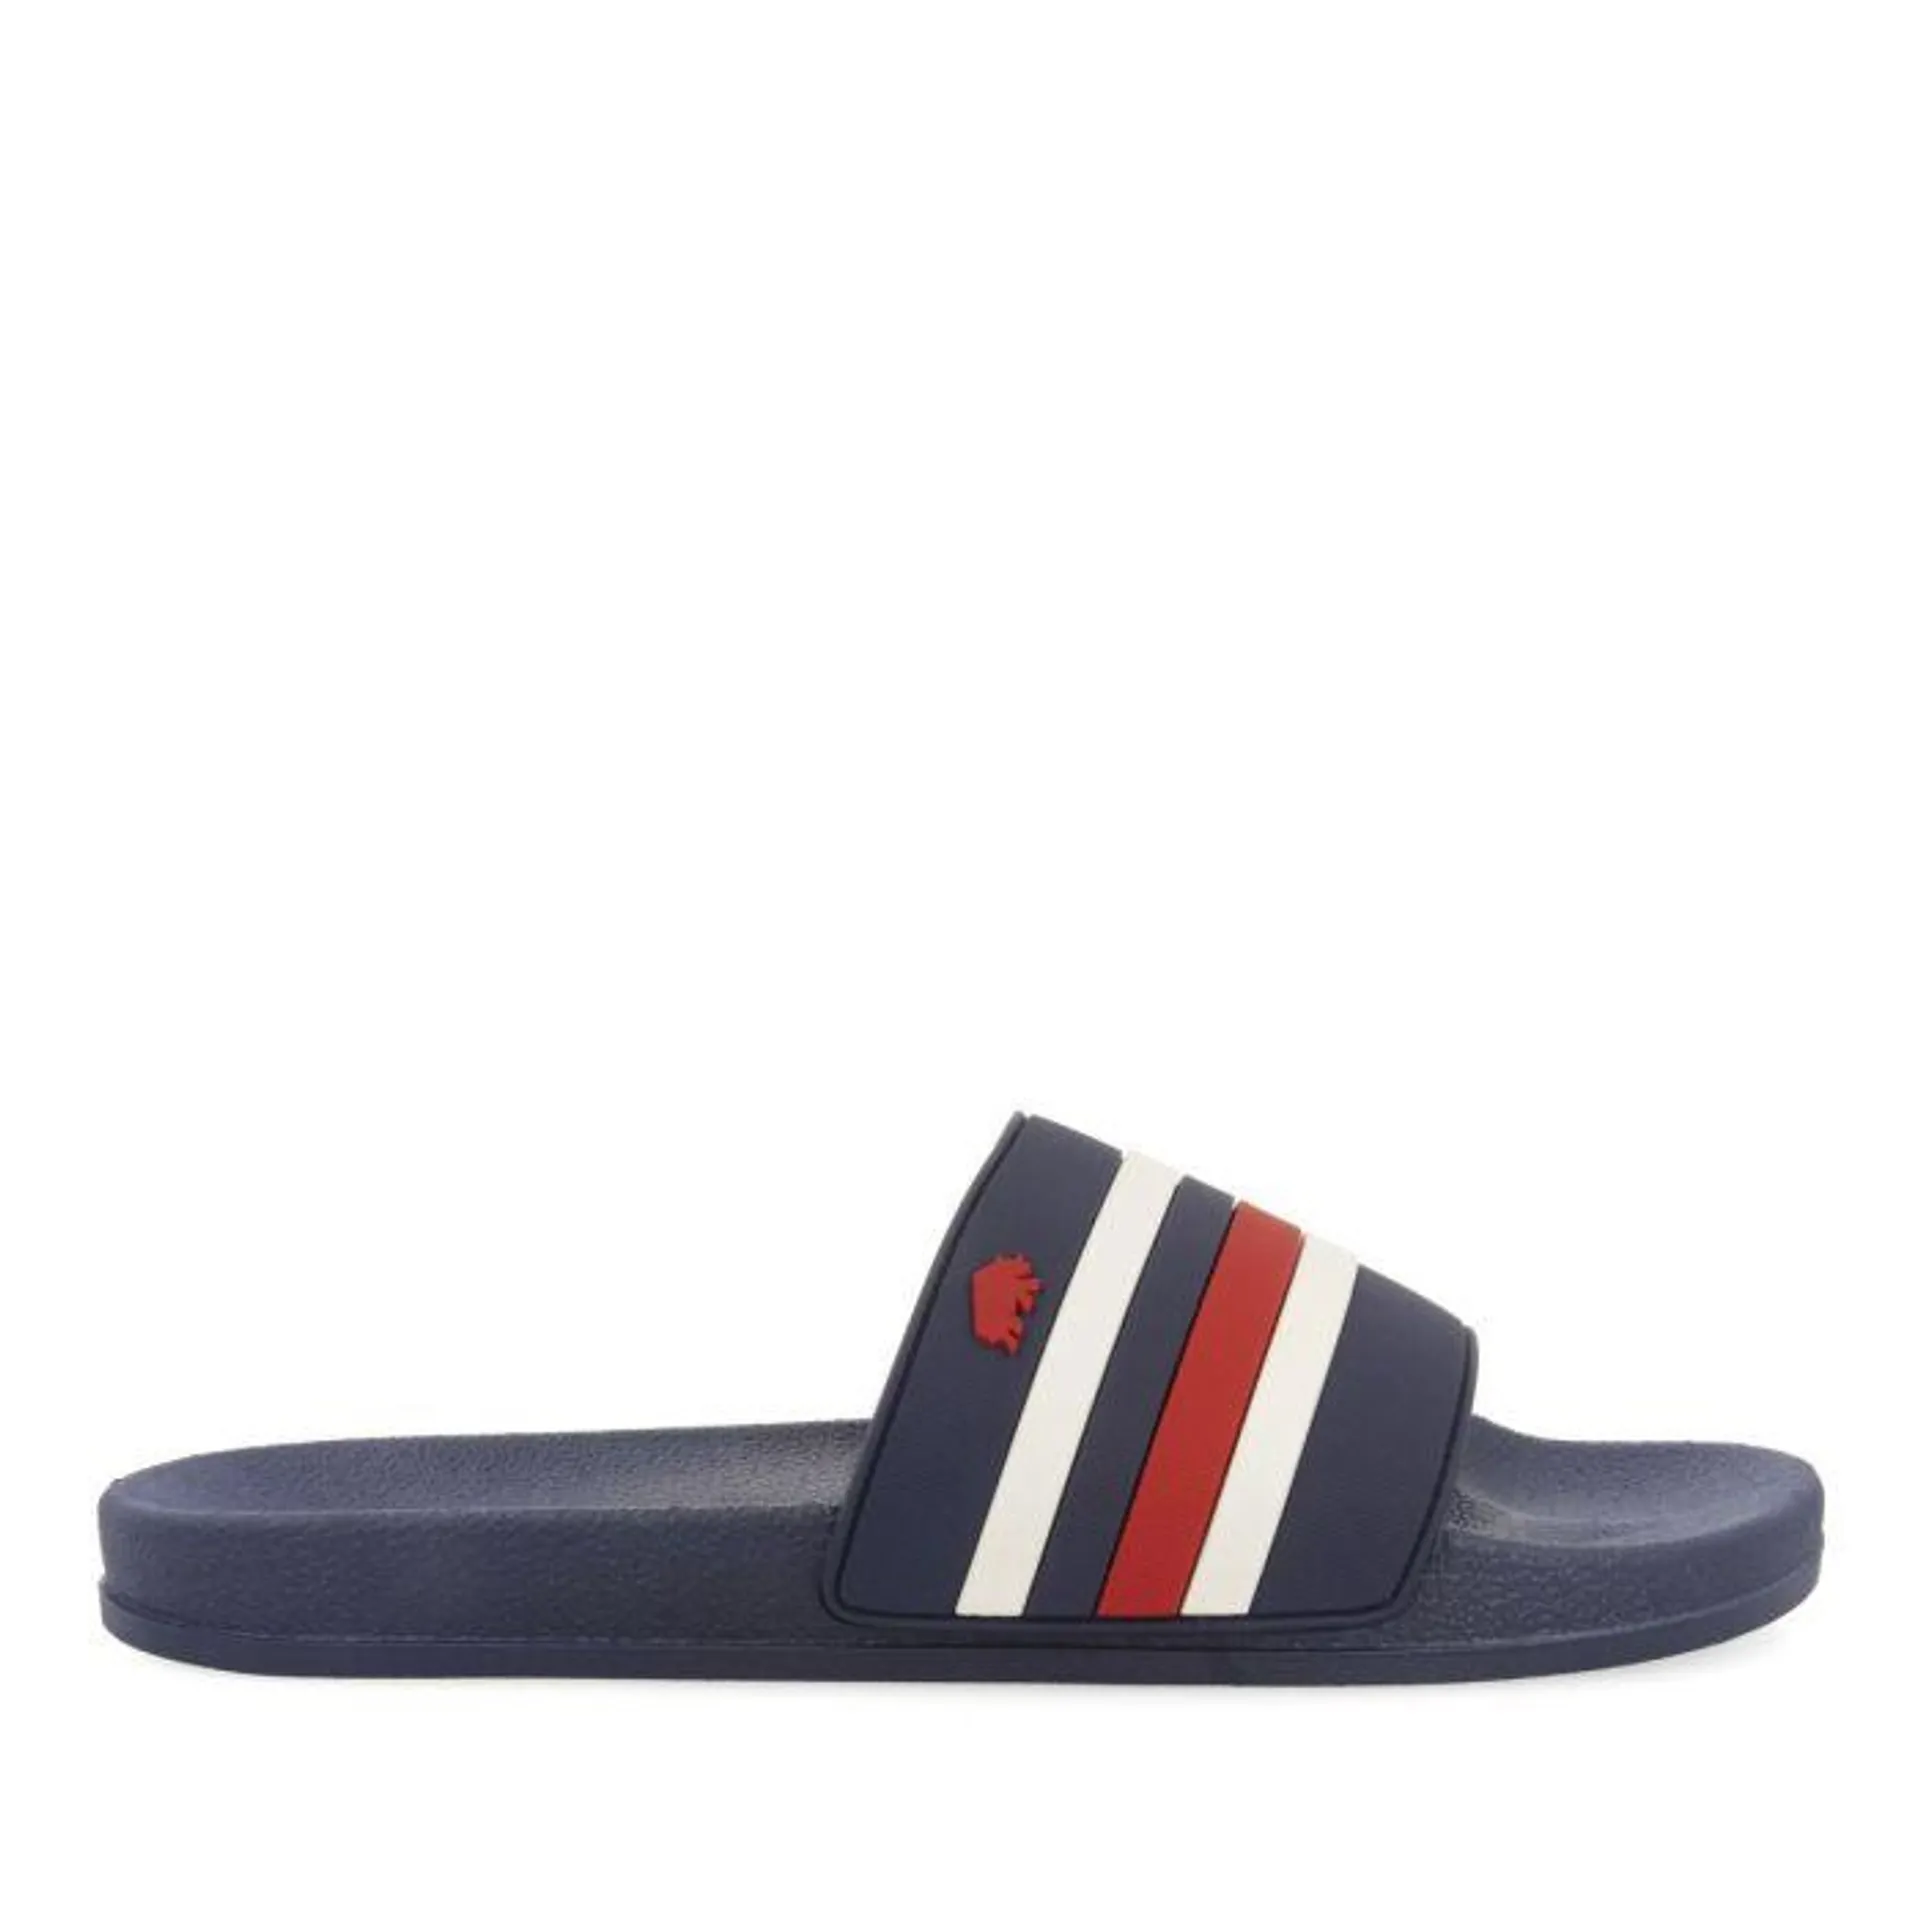 BLUE NAVY SLIPPERS WITH COLOR DETAILS FOR MEN BURGIO